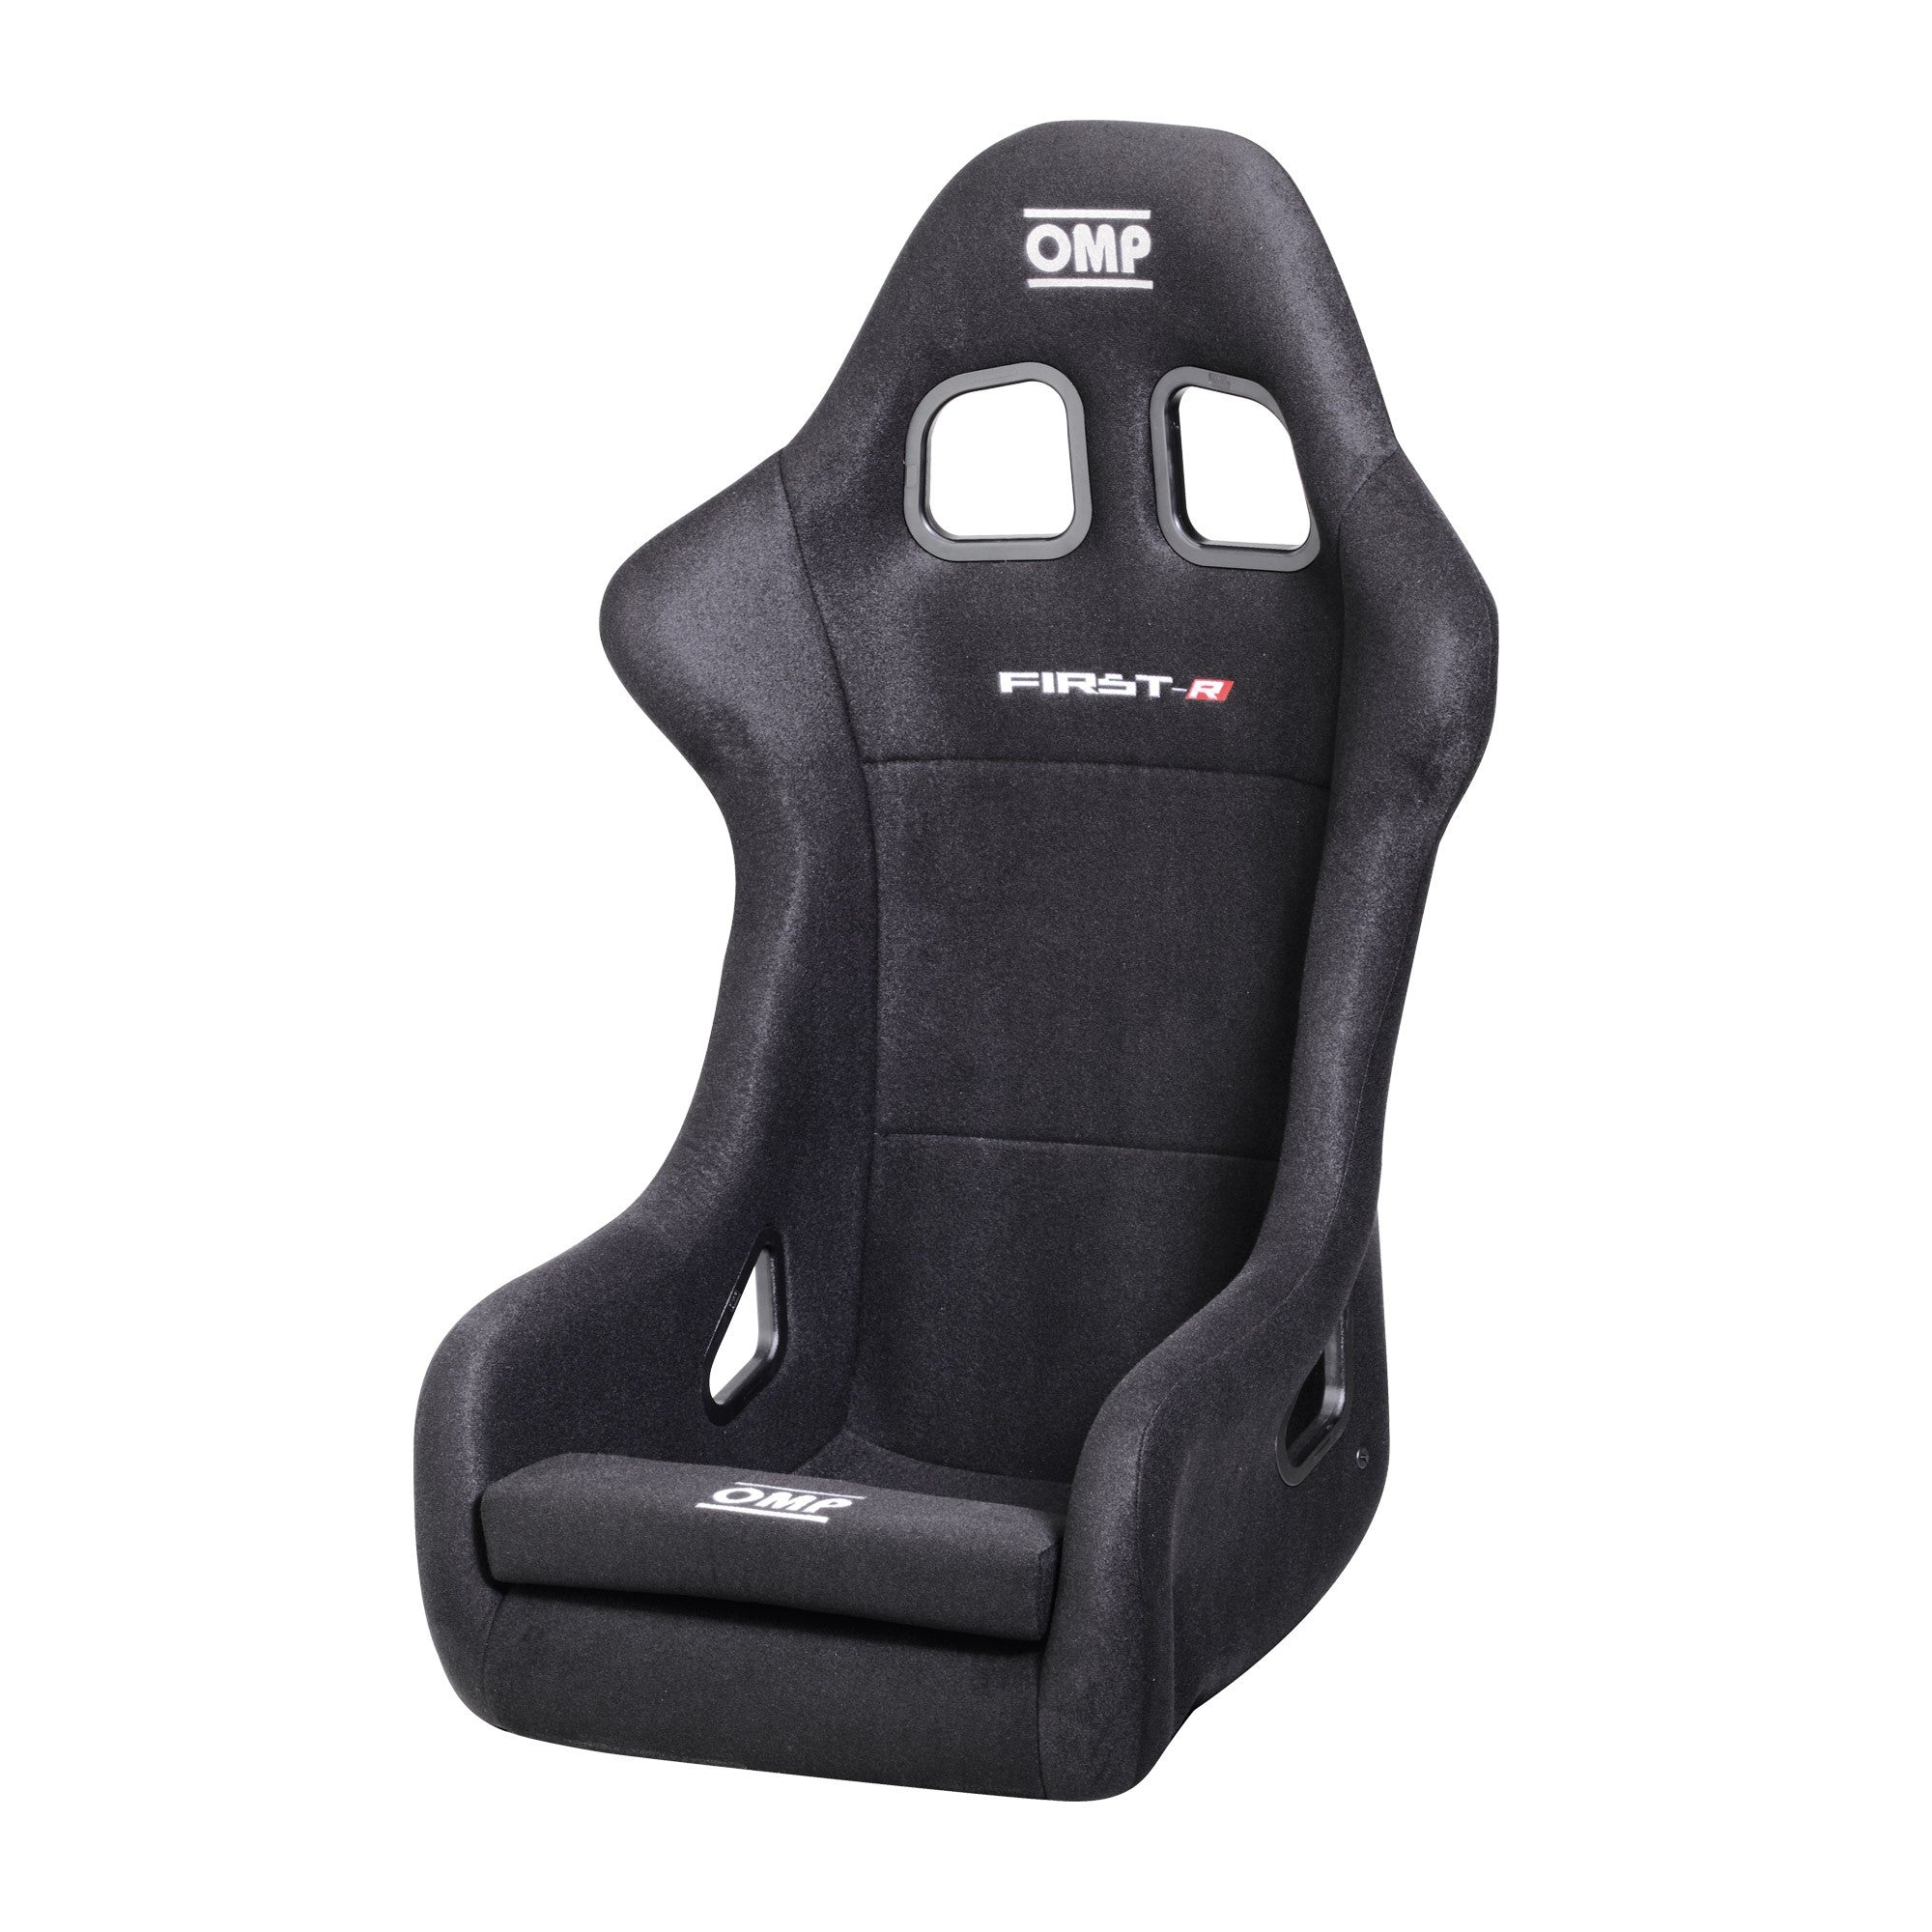 OMP RACING SEAT FIRST-R